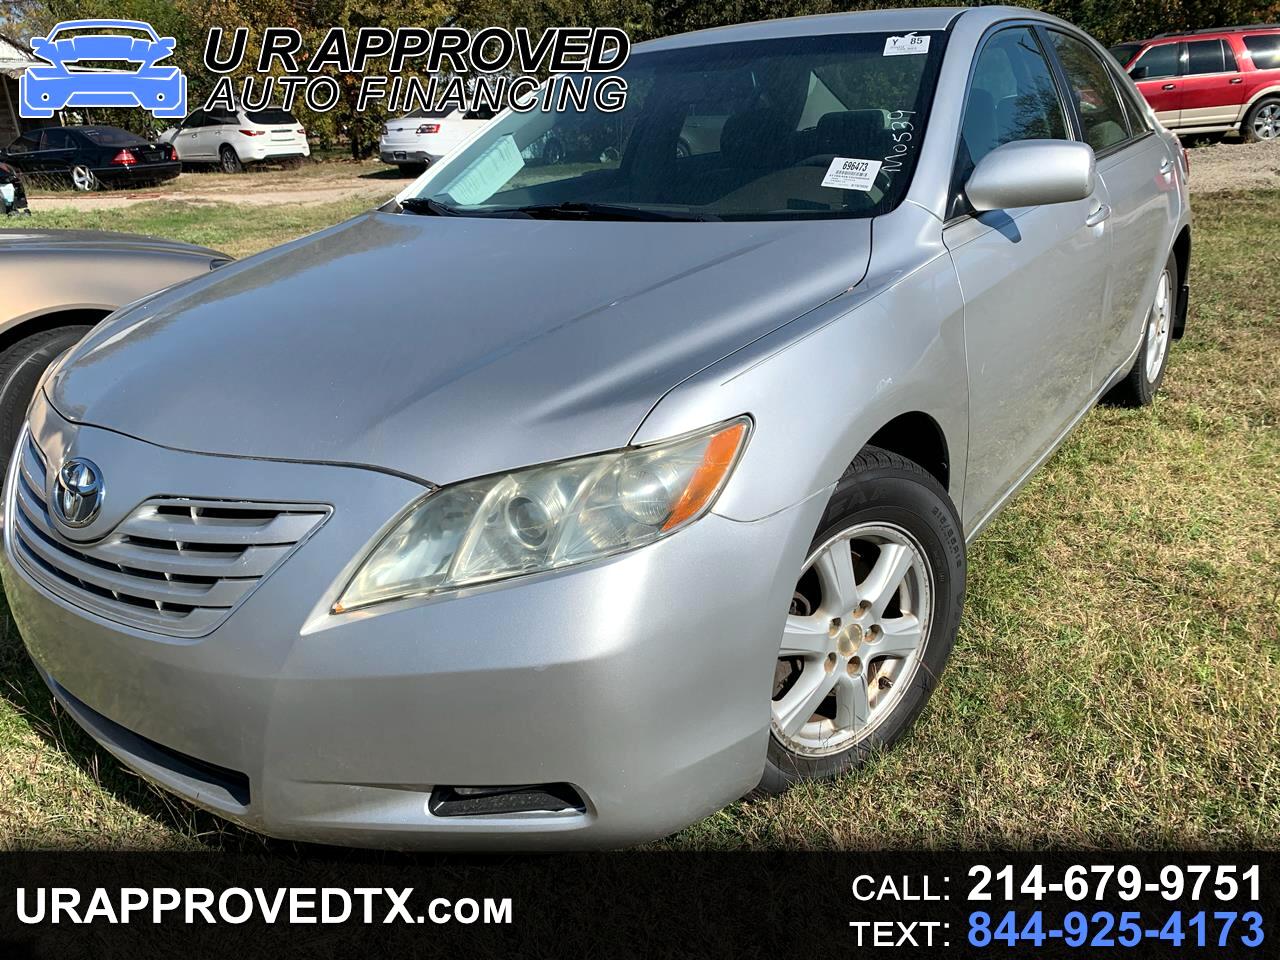 Used 2009 TOYOTA CAMRY G DIGNIS EDITIONDBAACV40 for Sale BG500149  BE  FORWARD